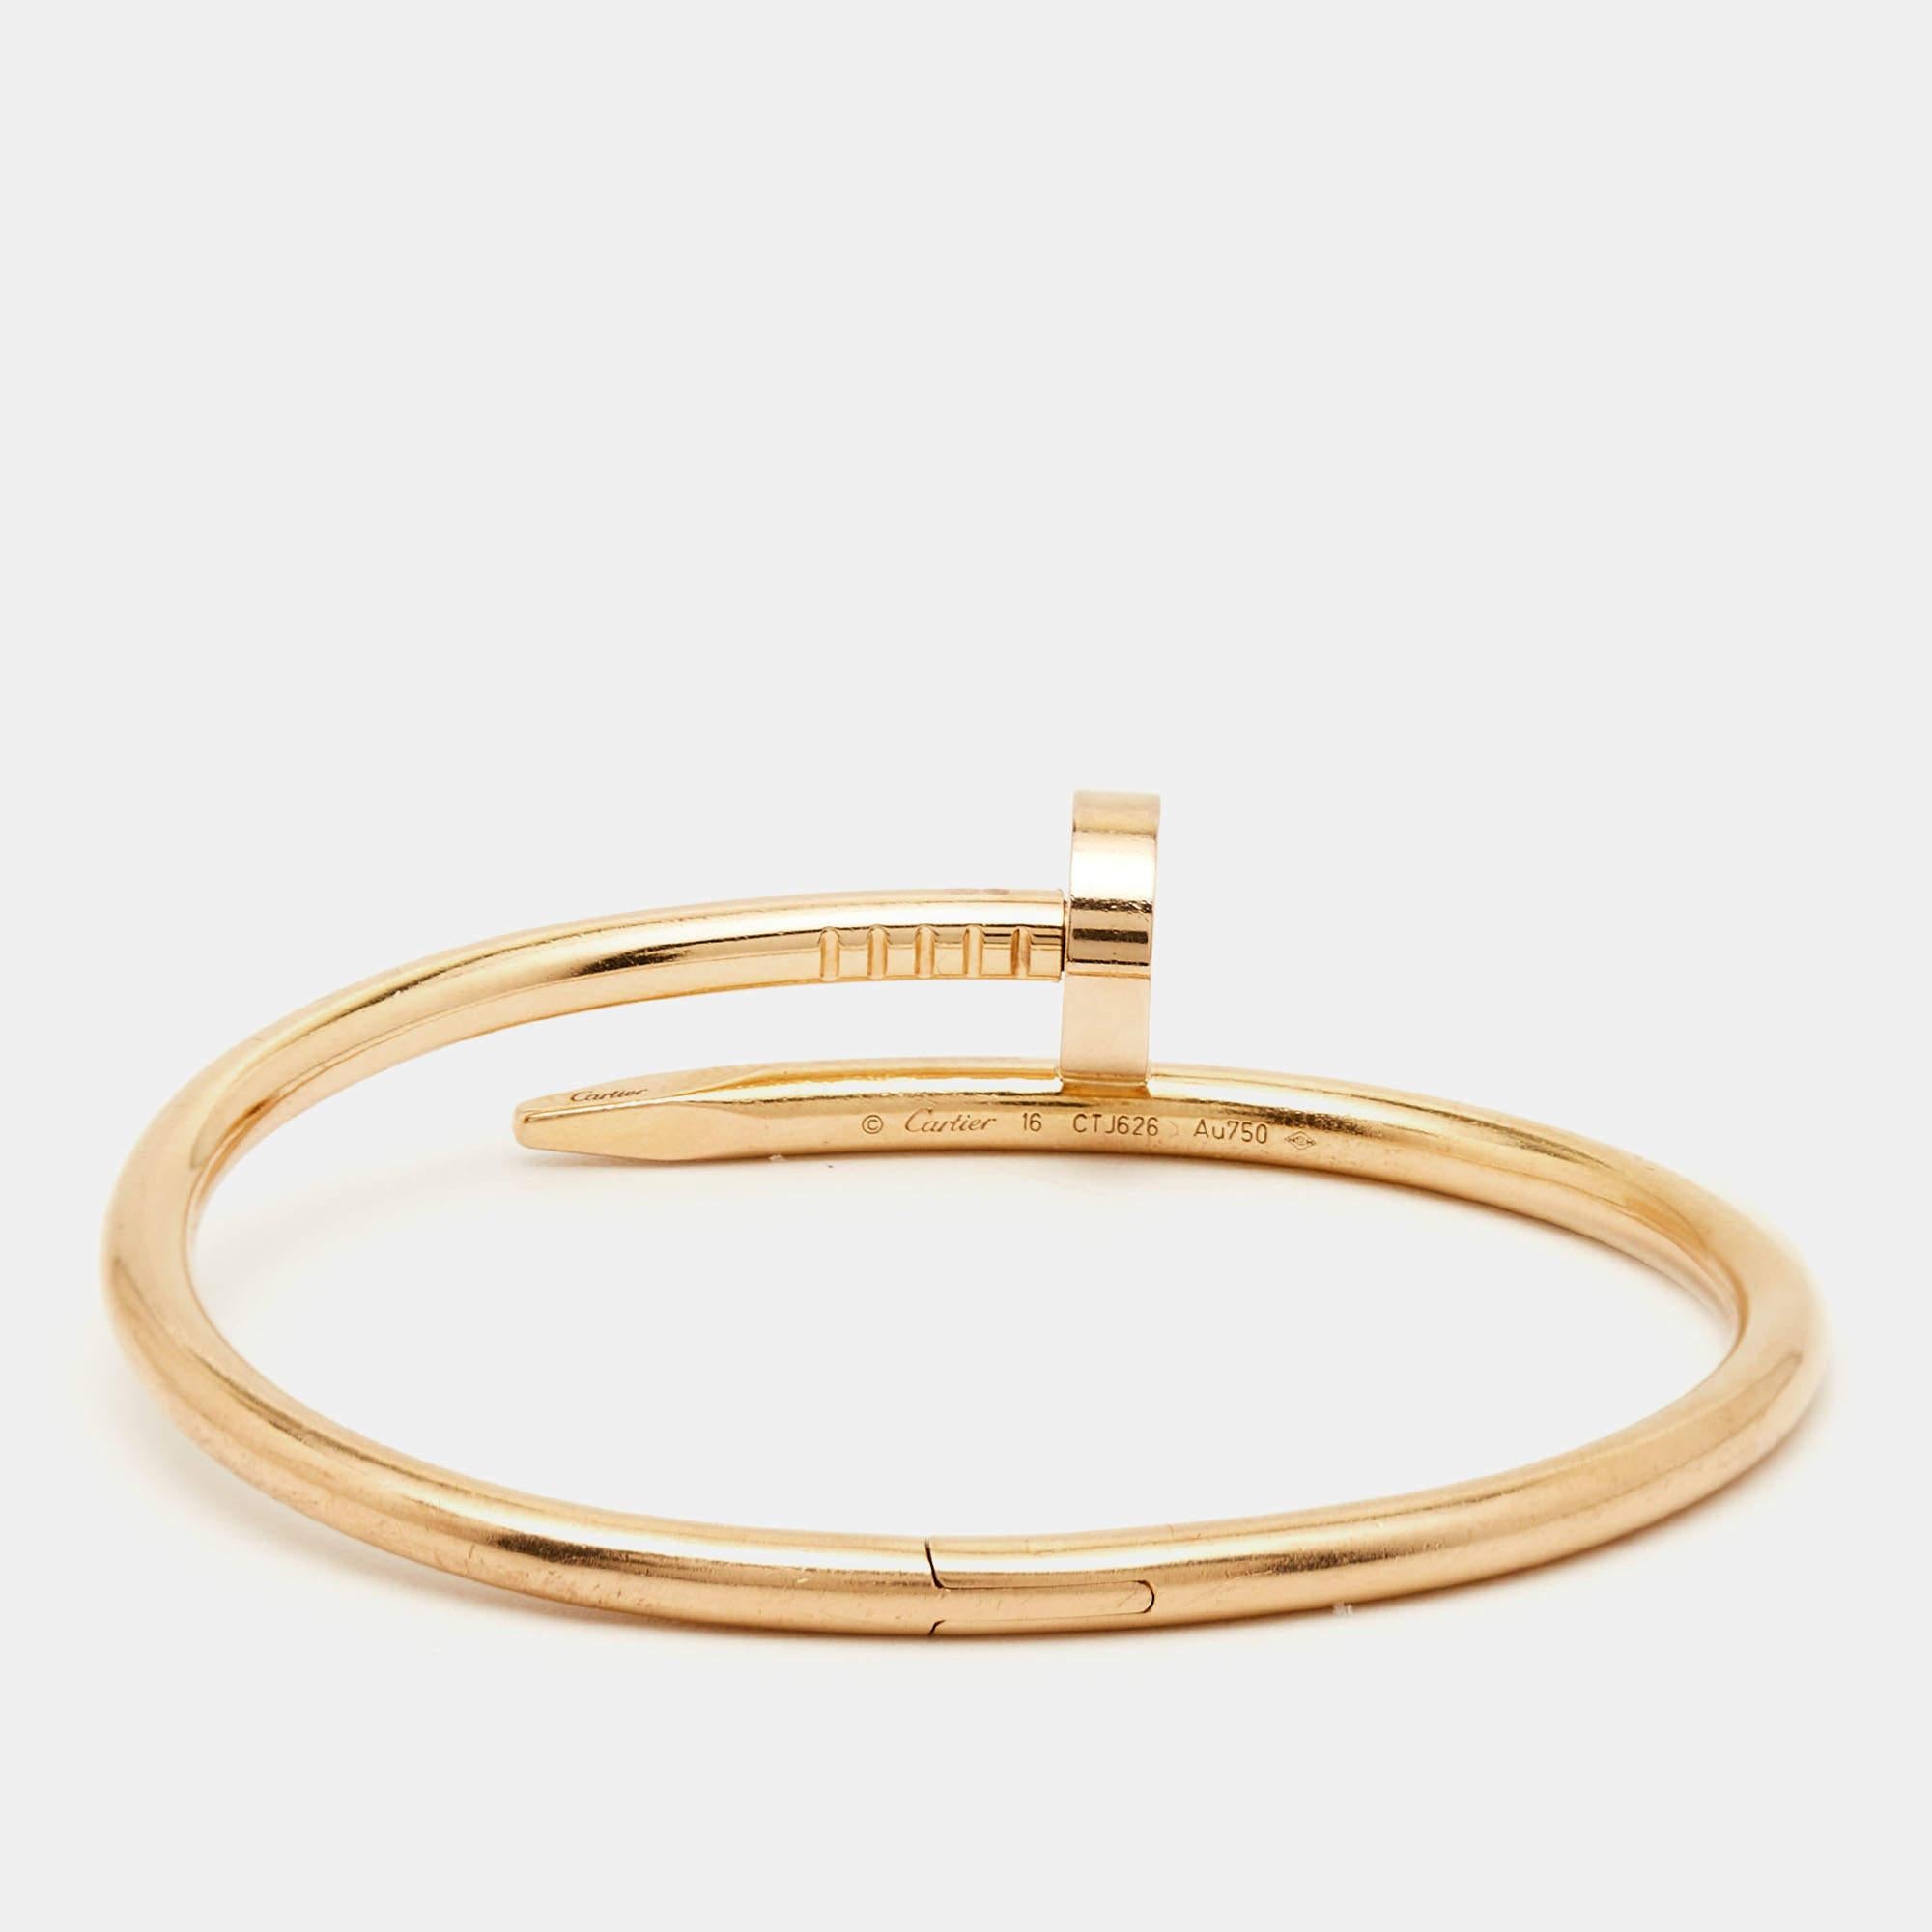 The Cartier Juste Un Clou bracelet is an iconic and luxurious piece of jewelry. Crafted from gleaming 18k rose gold, its sleek and minimalist design captures the essence of a nail transformed into an elegant and distinctive fashion statement.

